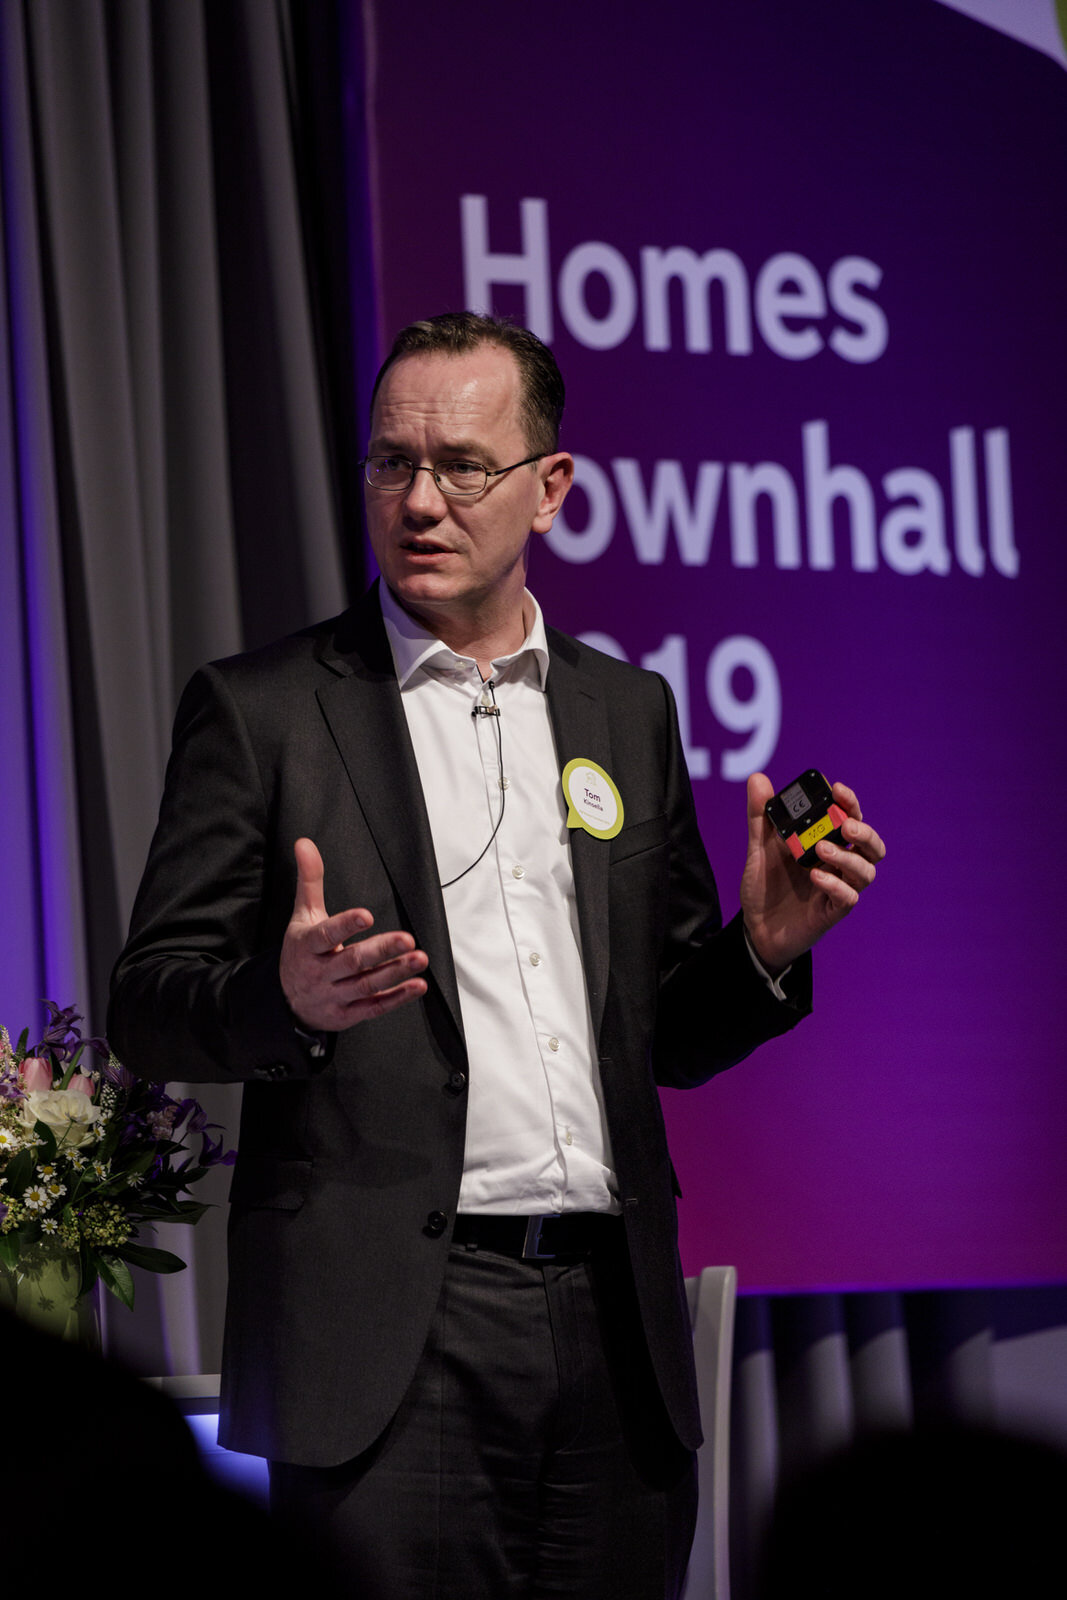  AIB Homes Townhall Dublin 2019. by conference and event photographer Roger Kenny 